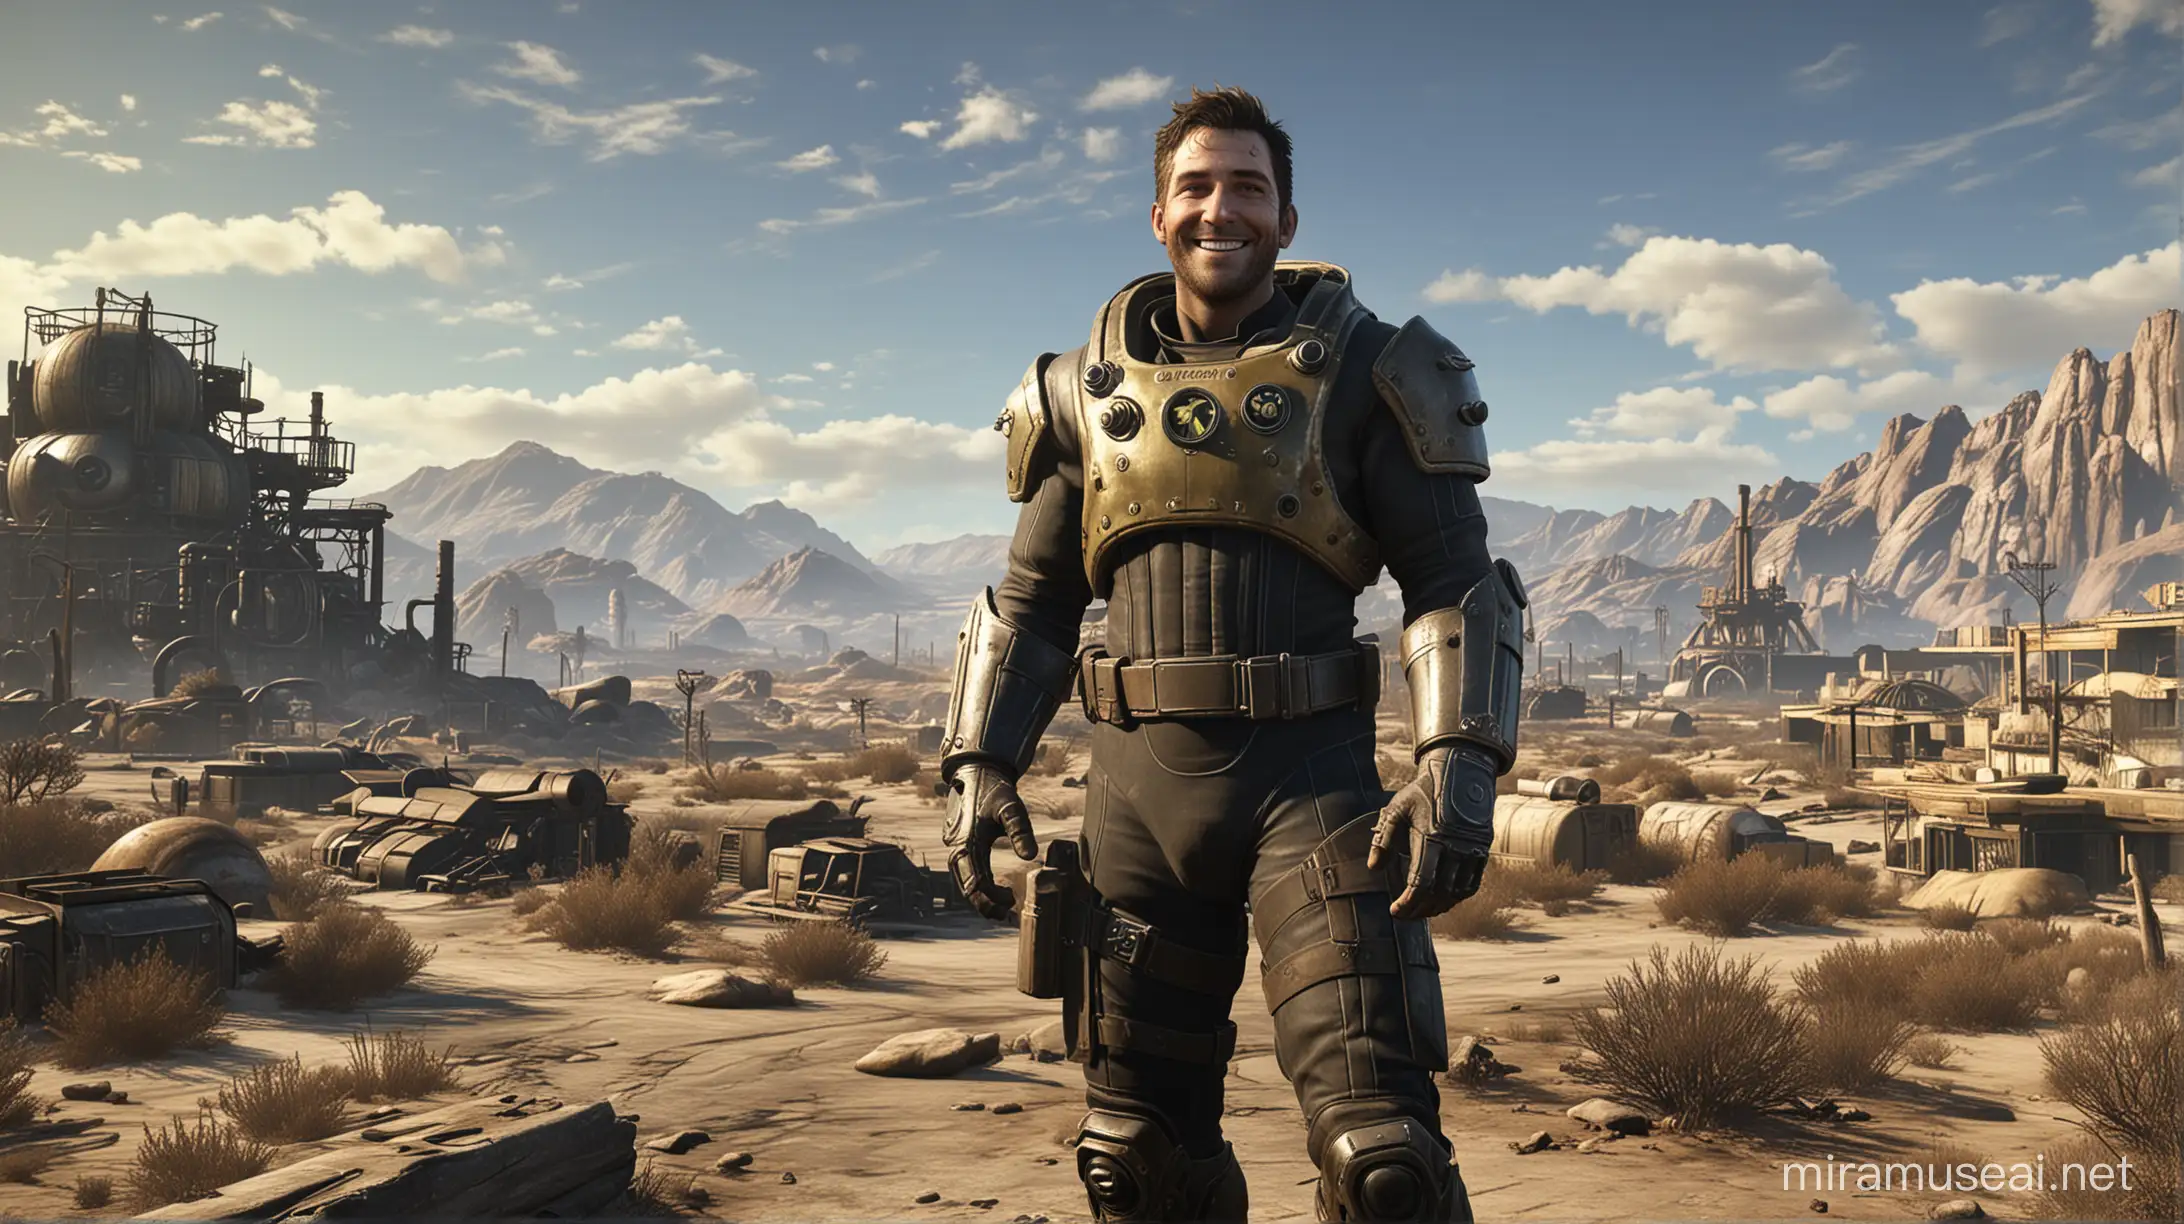 Smiling Man in Fallout Vault 33 Suit against Wasteland Backdrop